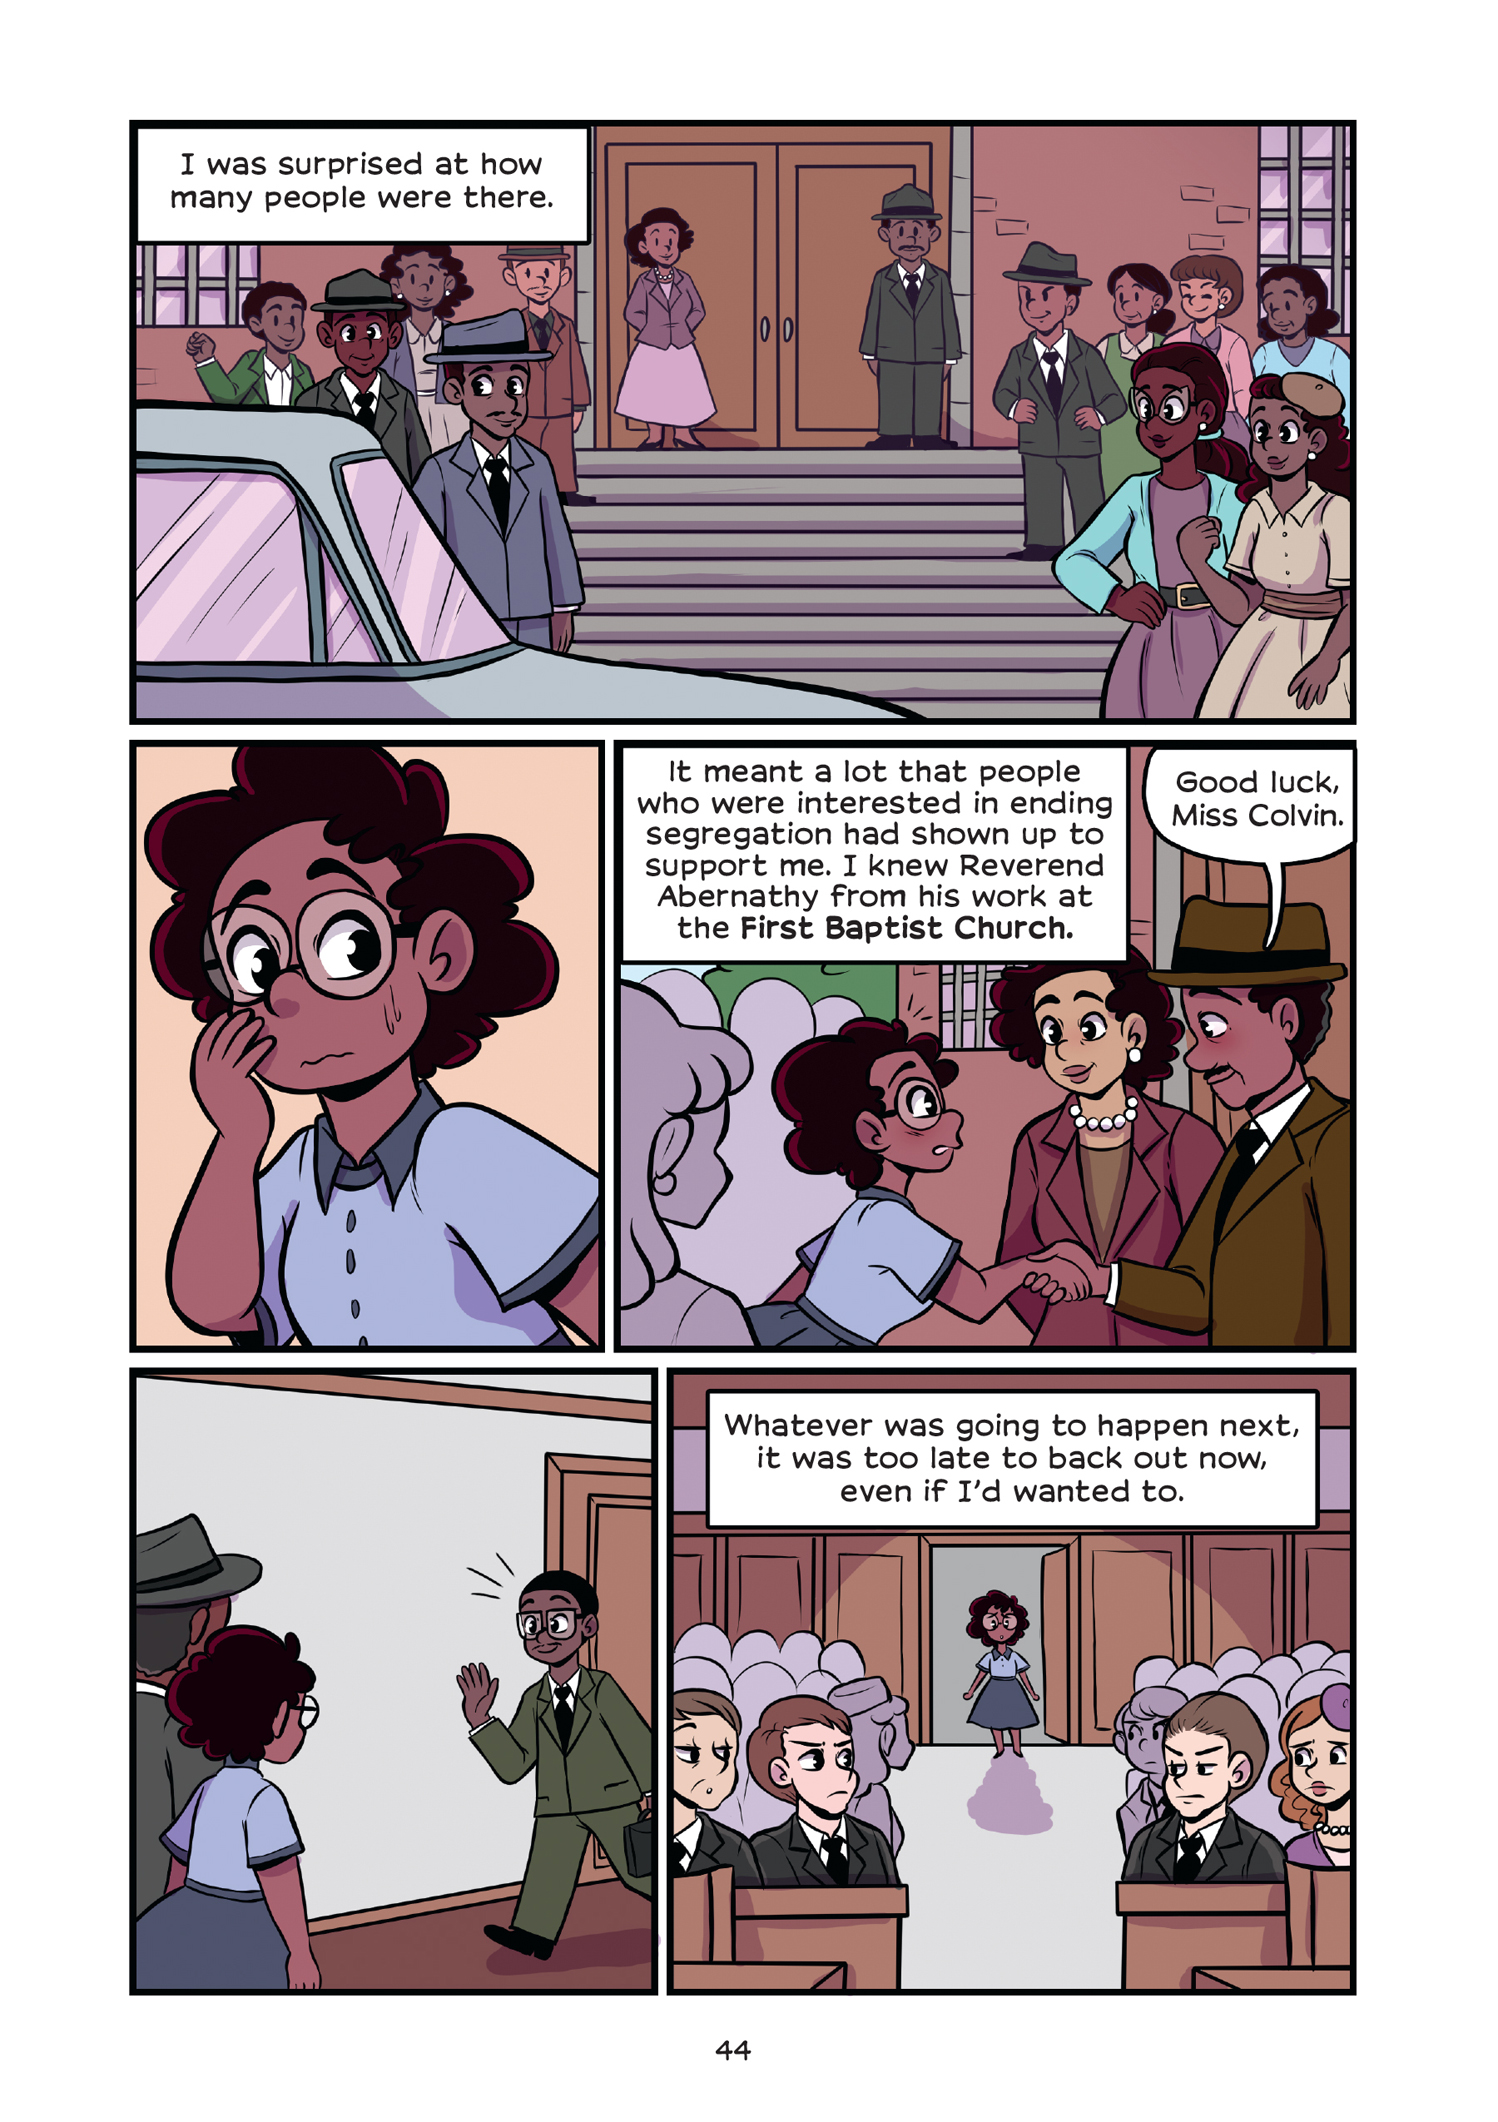 Read online History Comics comic -  Issue # Rosa Parks & Claudette Colvin - Civil Rights Heroes - 49